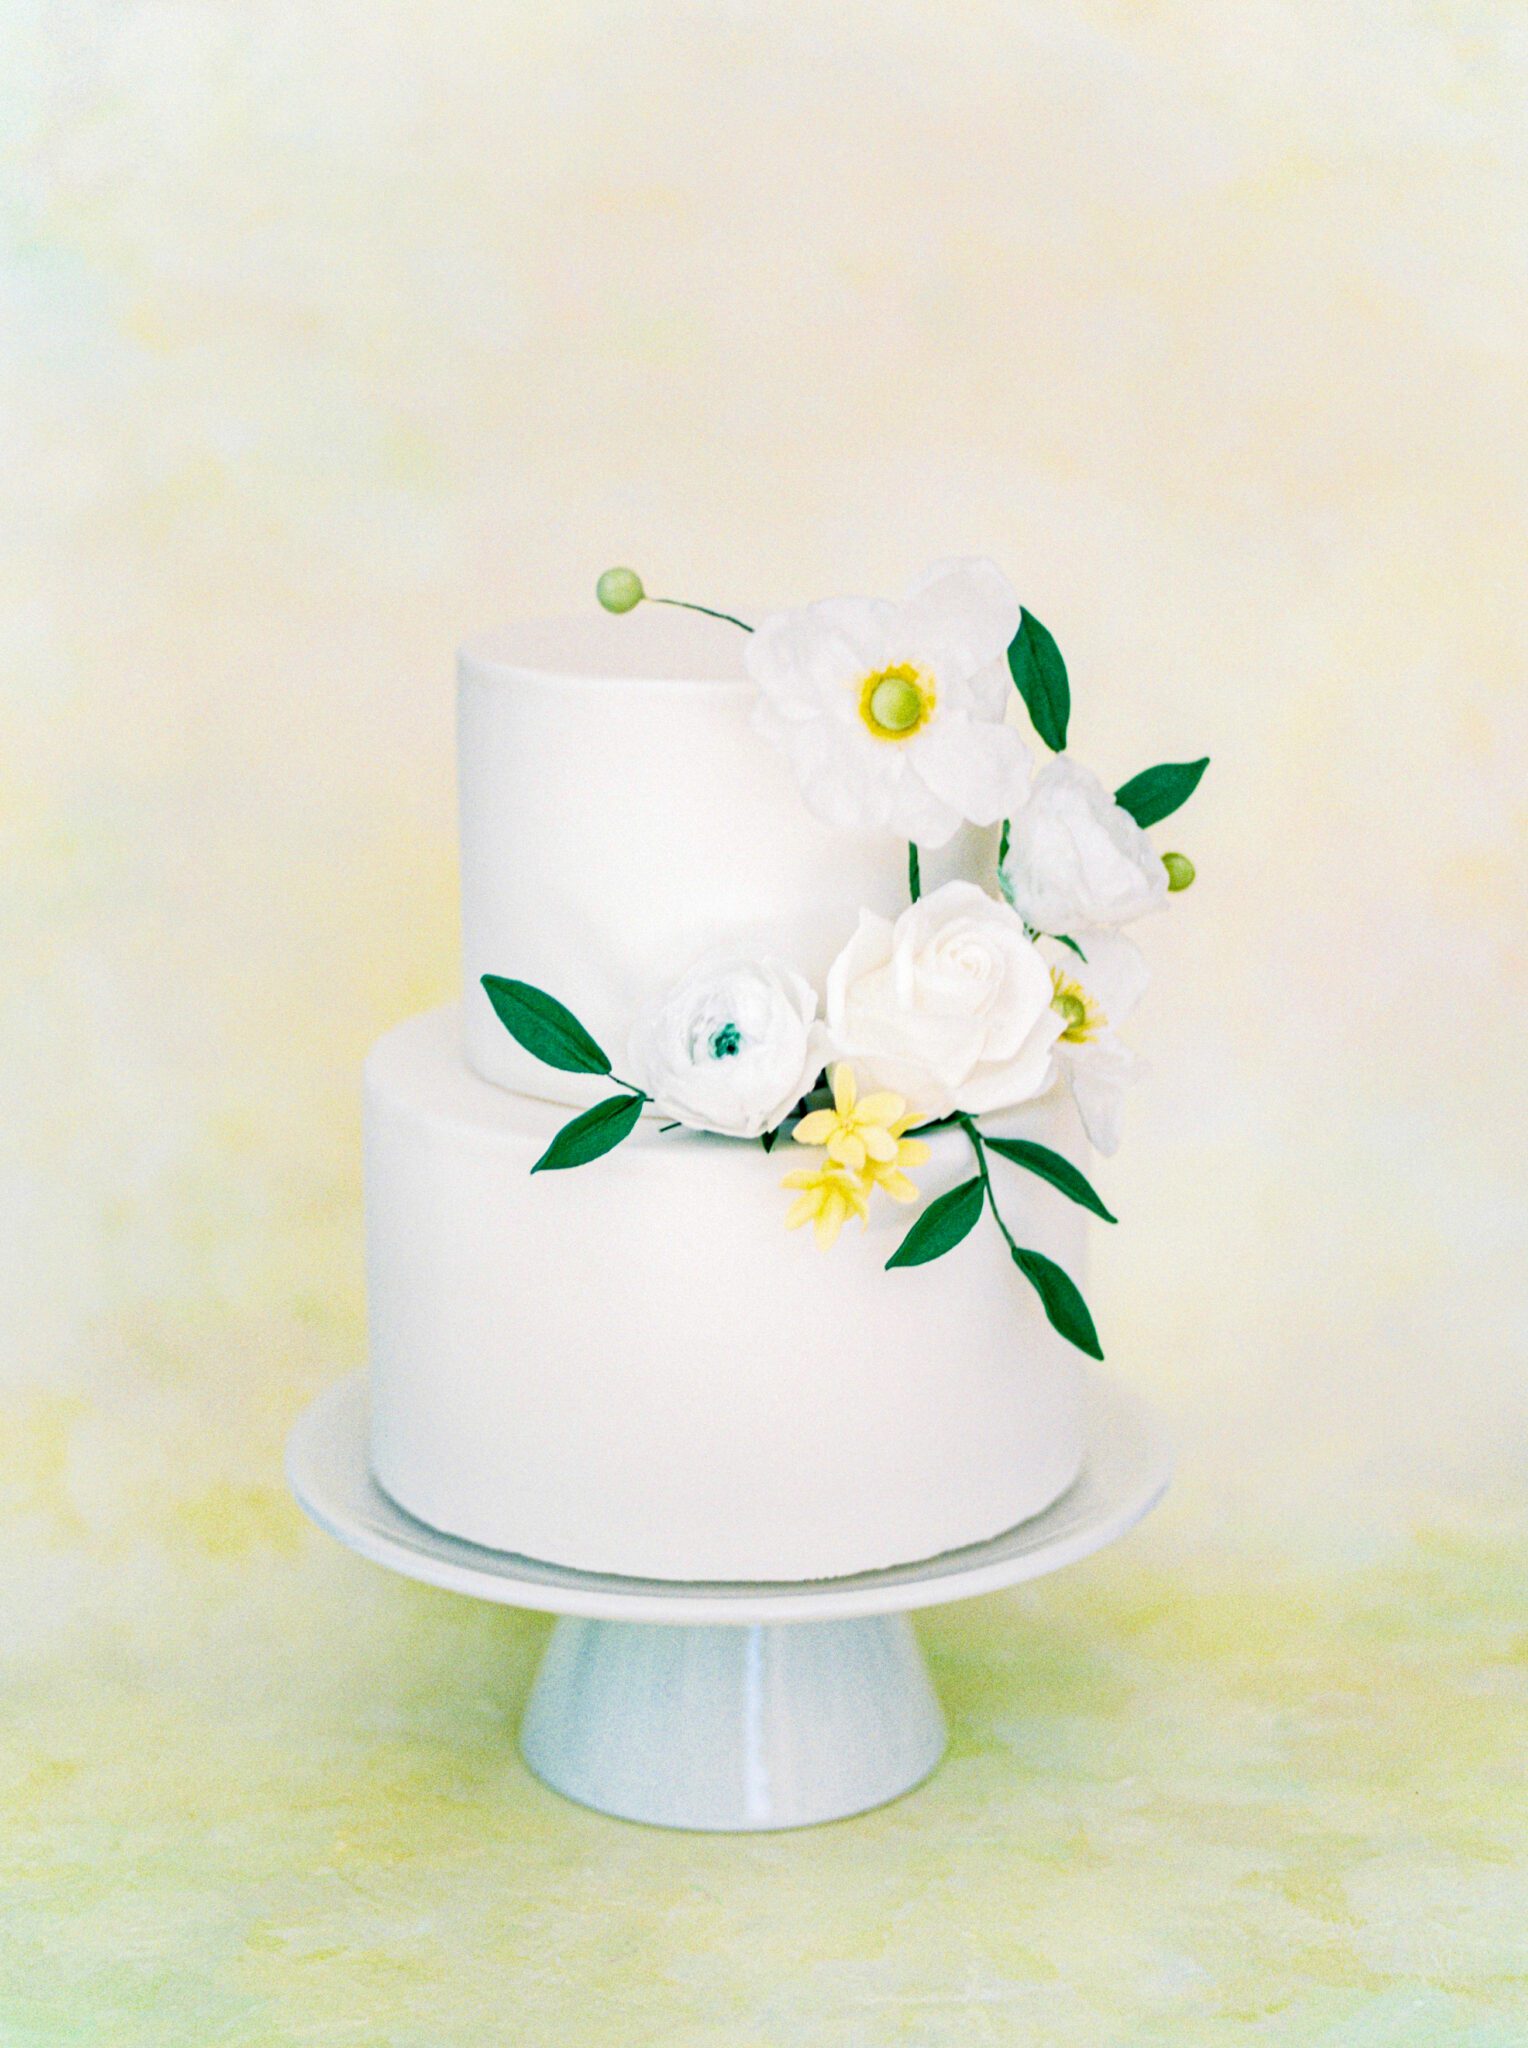 Elegant cottage core inspired 3-tiered white wedding cake decorated with yellow and white florals and greenery by Brianne Gabrielle Cakes. Spring wedding cake inspiration.